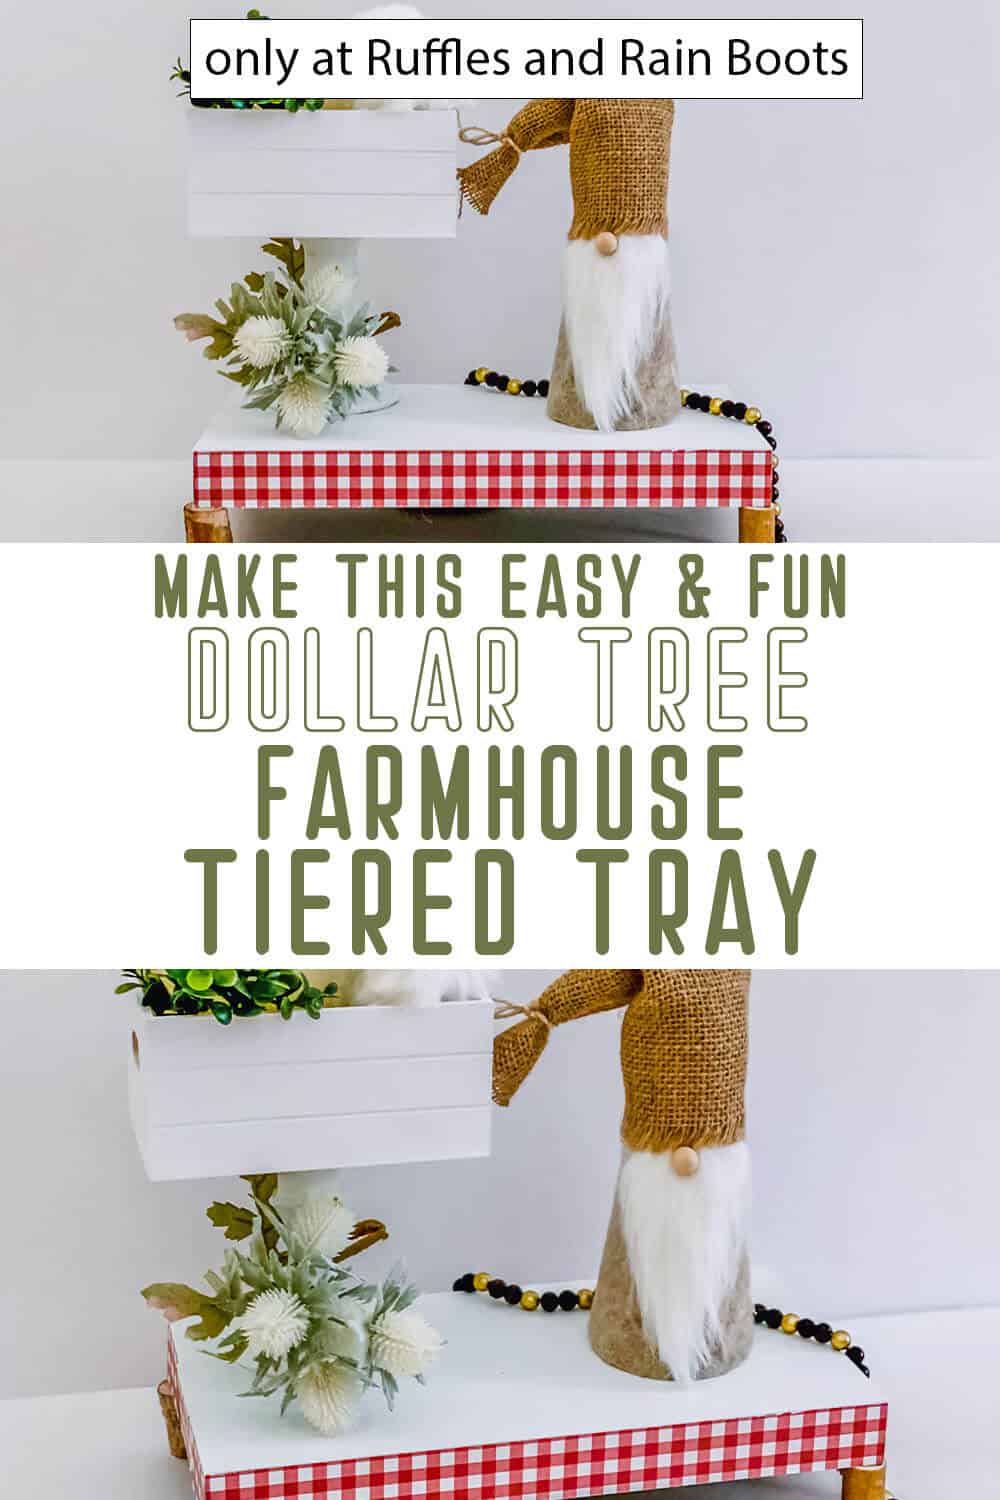 photo collage of dollar tree farmhouse tiered tray with text which reads make this easy & fun dollar tree farmhouse tiered tray